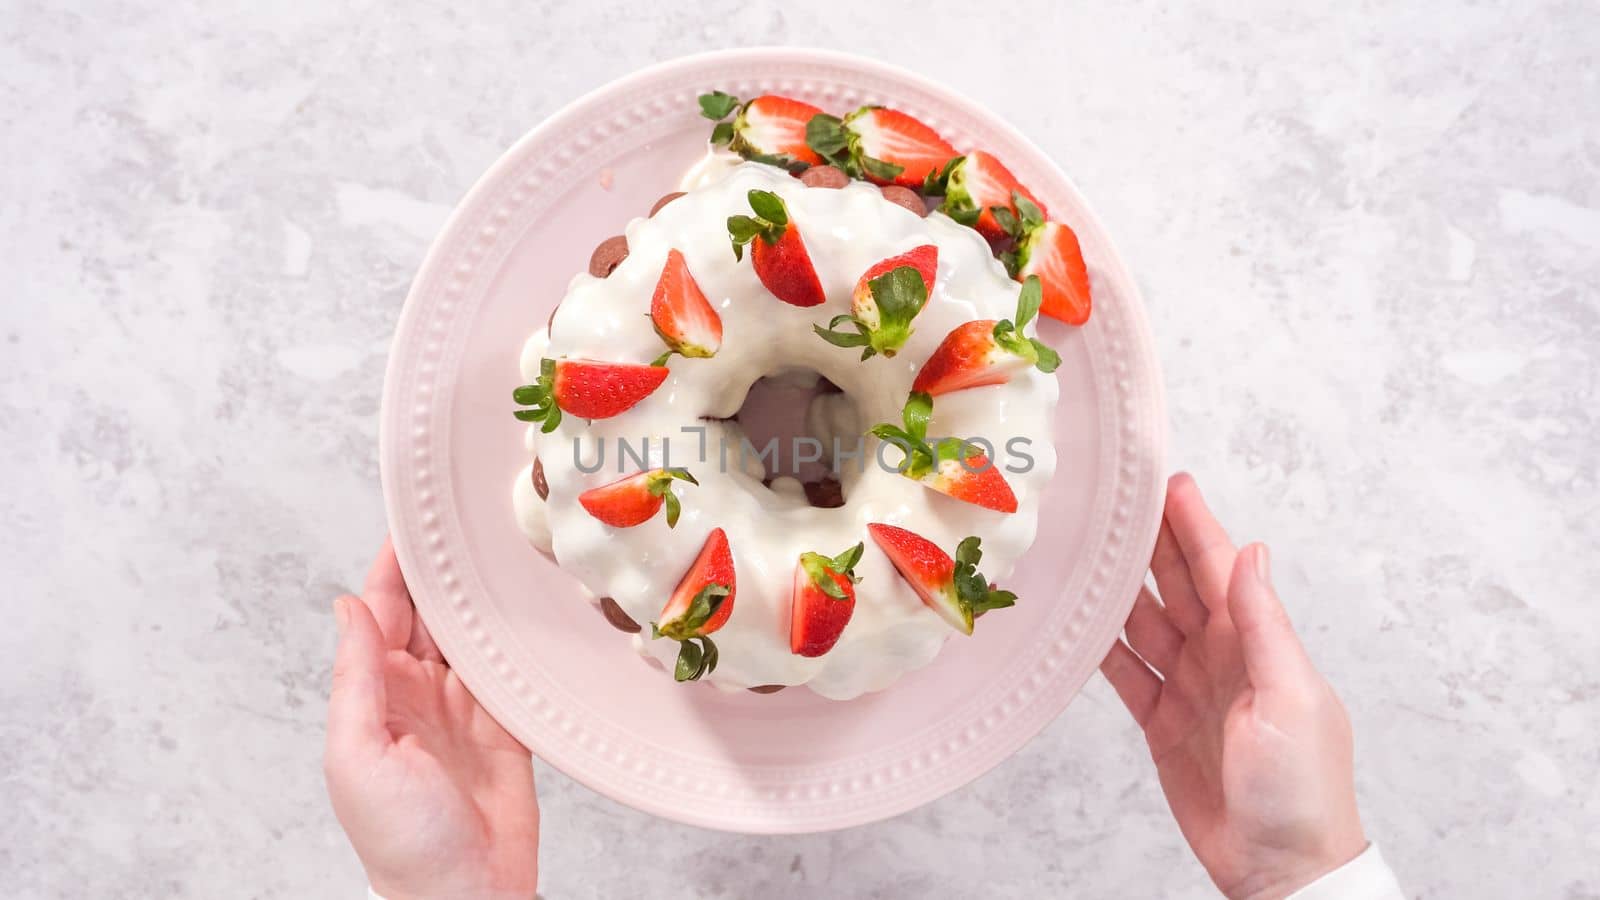 Flat lay. Step by step. Decorating freshly baked red velvet bundt cake with organic strawberries.